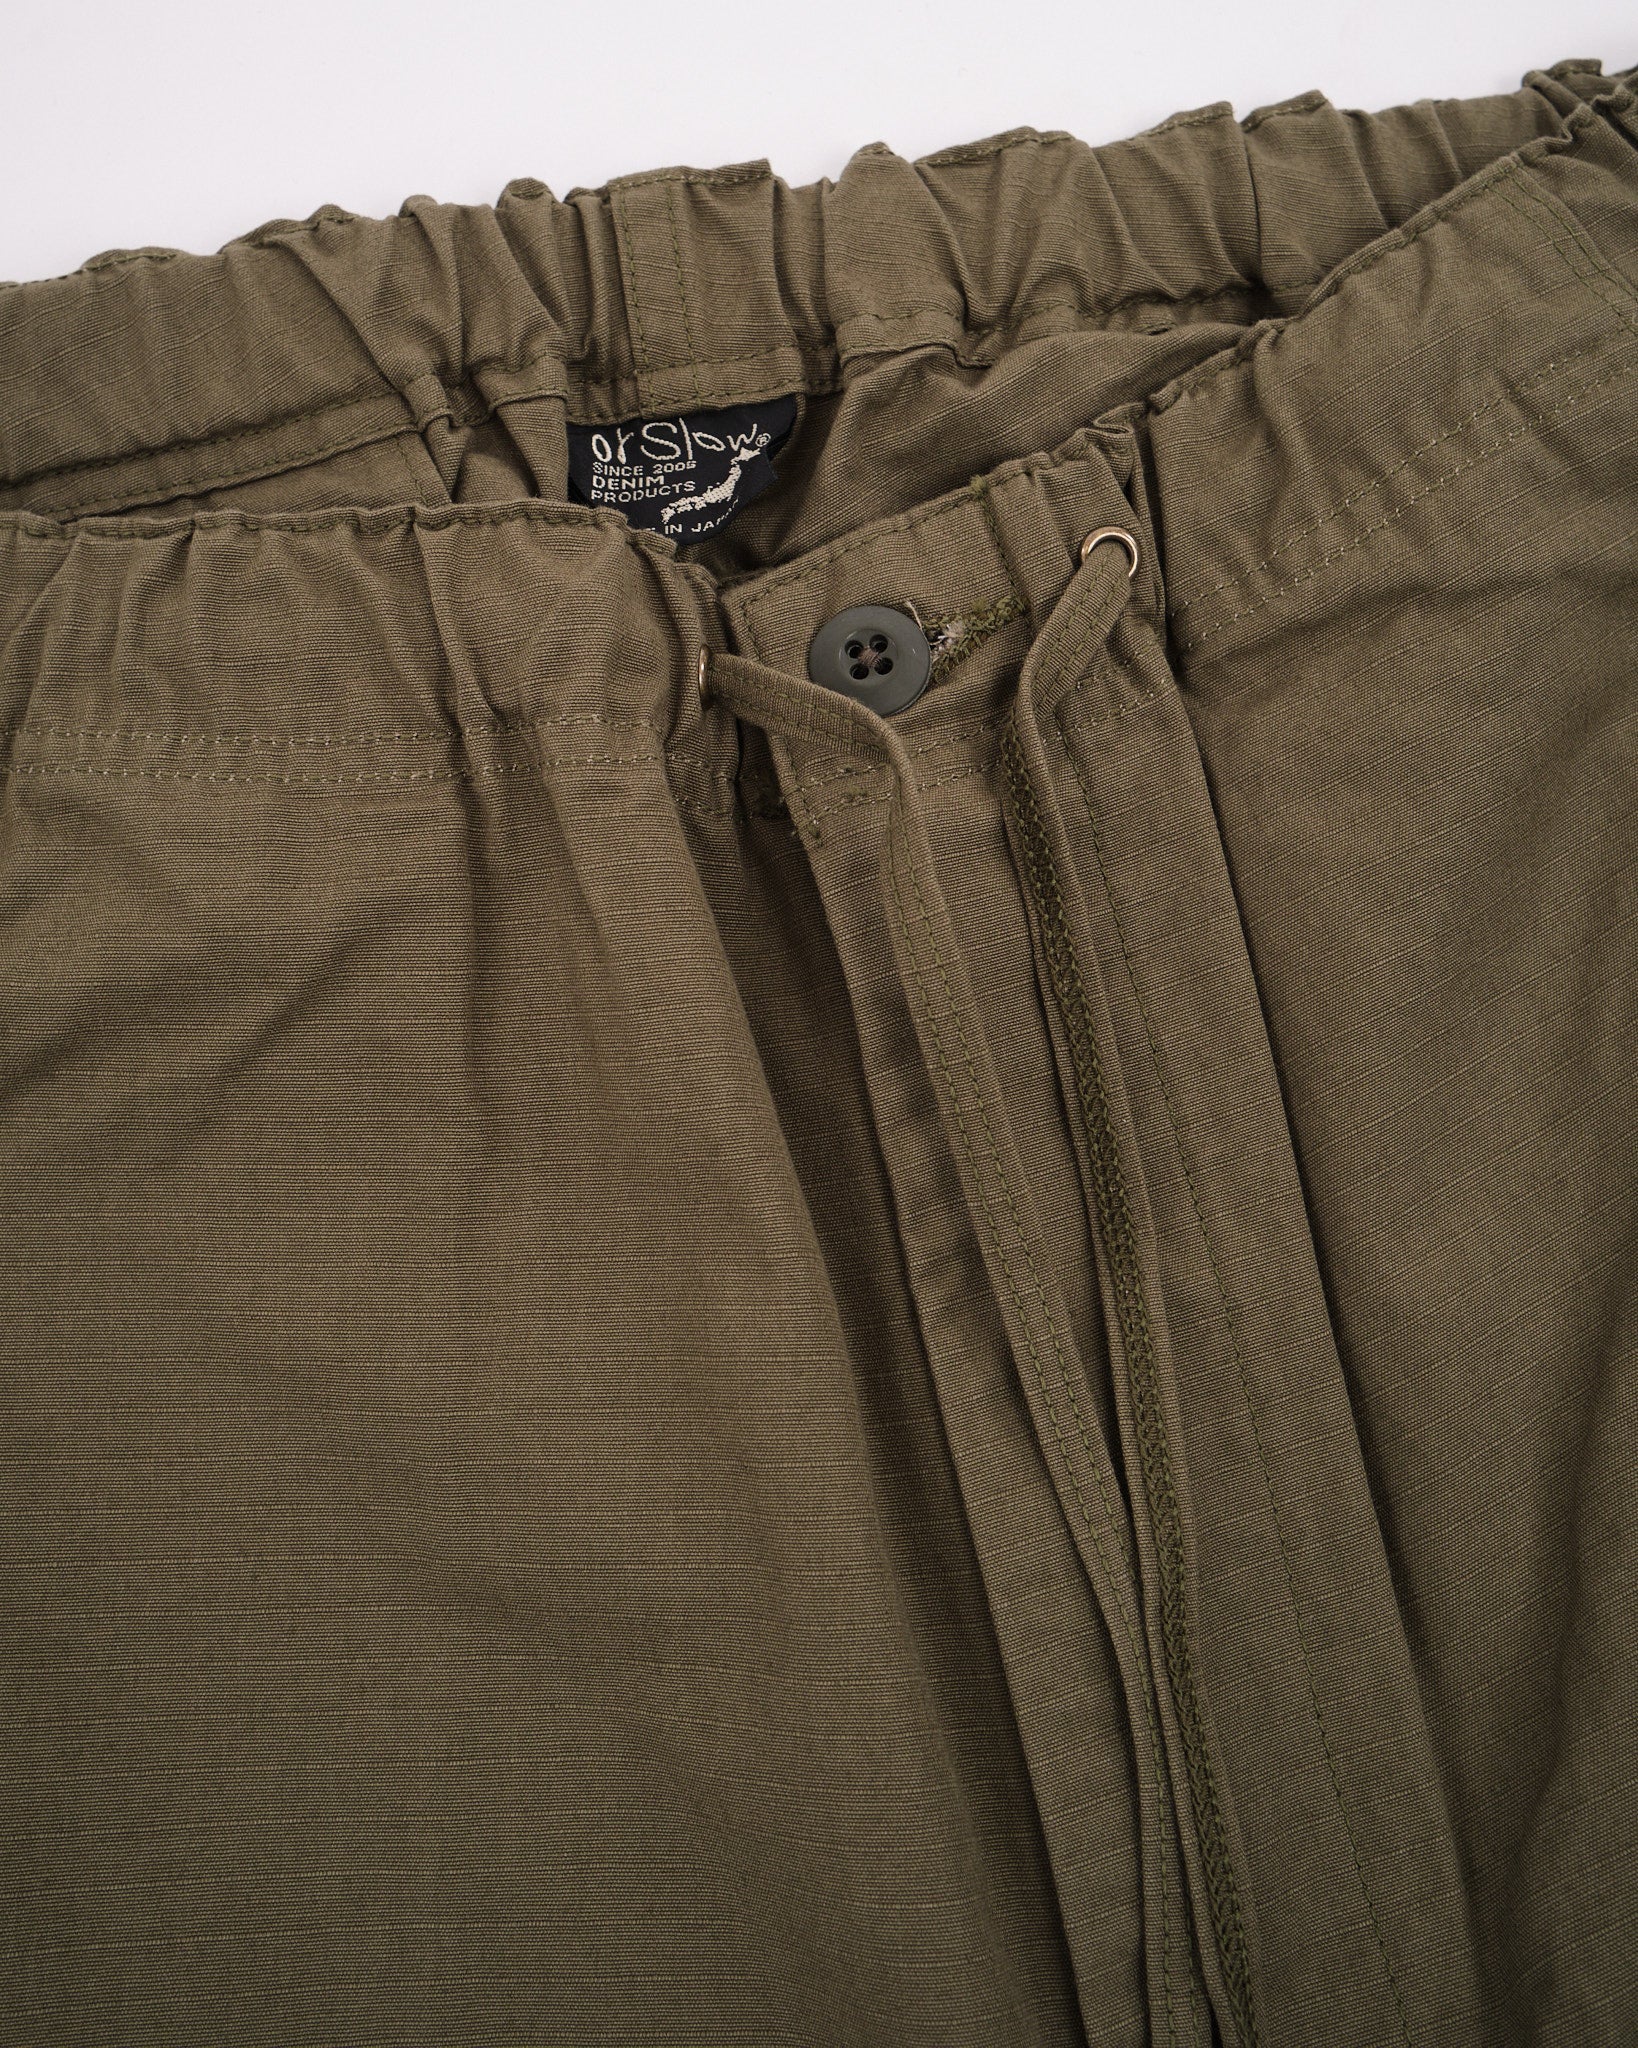 NEW YORKER PANTS ARMY GREEN - Meadow